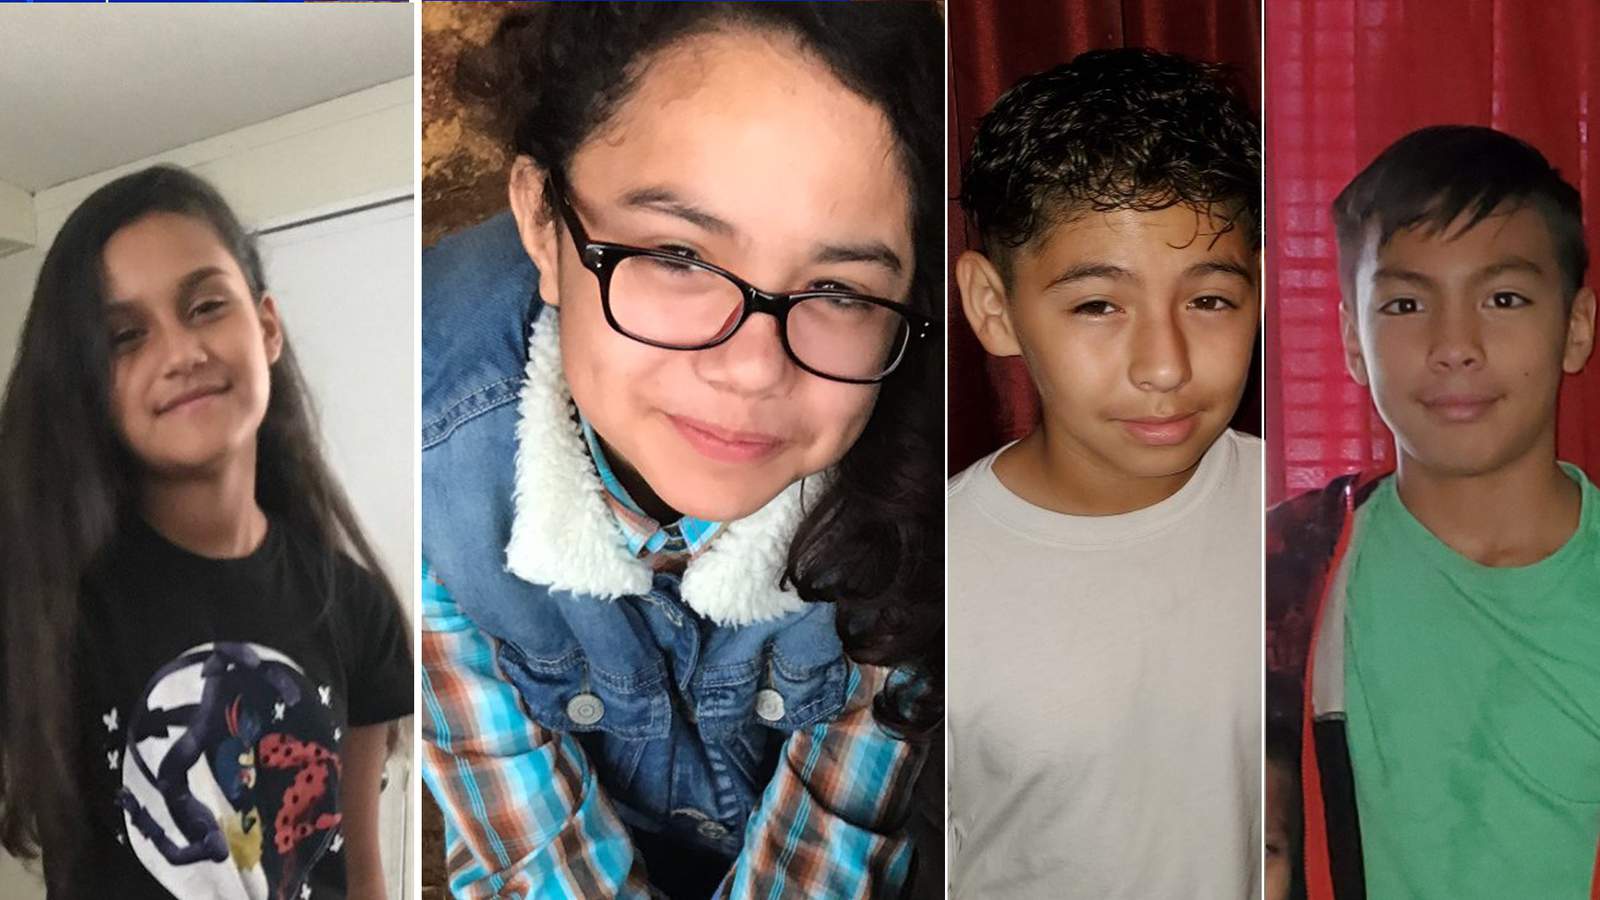 Police: 4 missing children in Lytle found safe